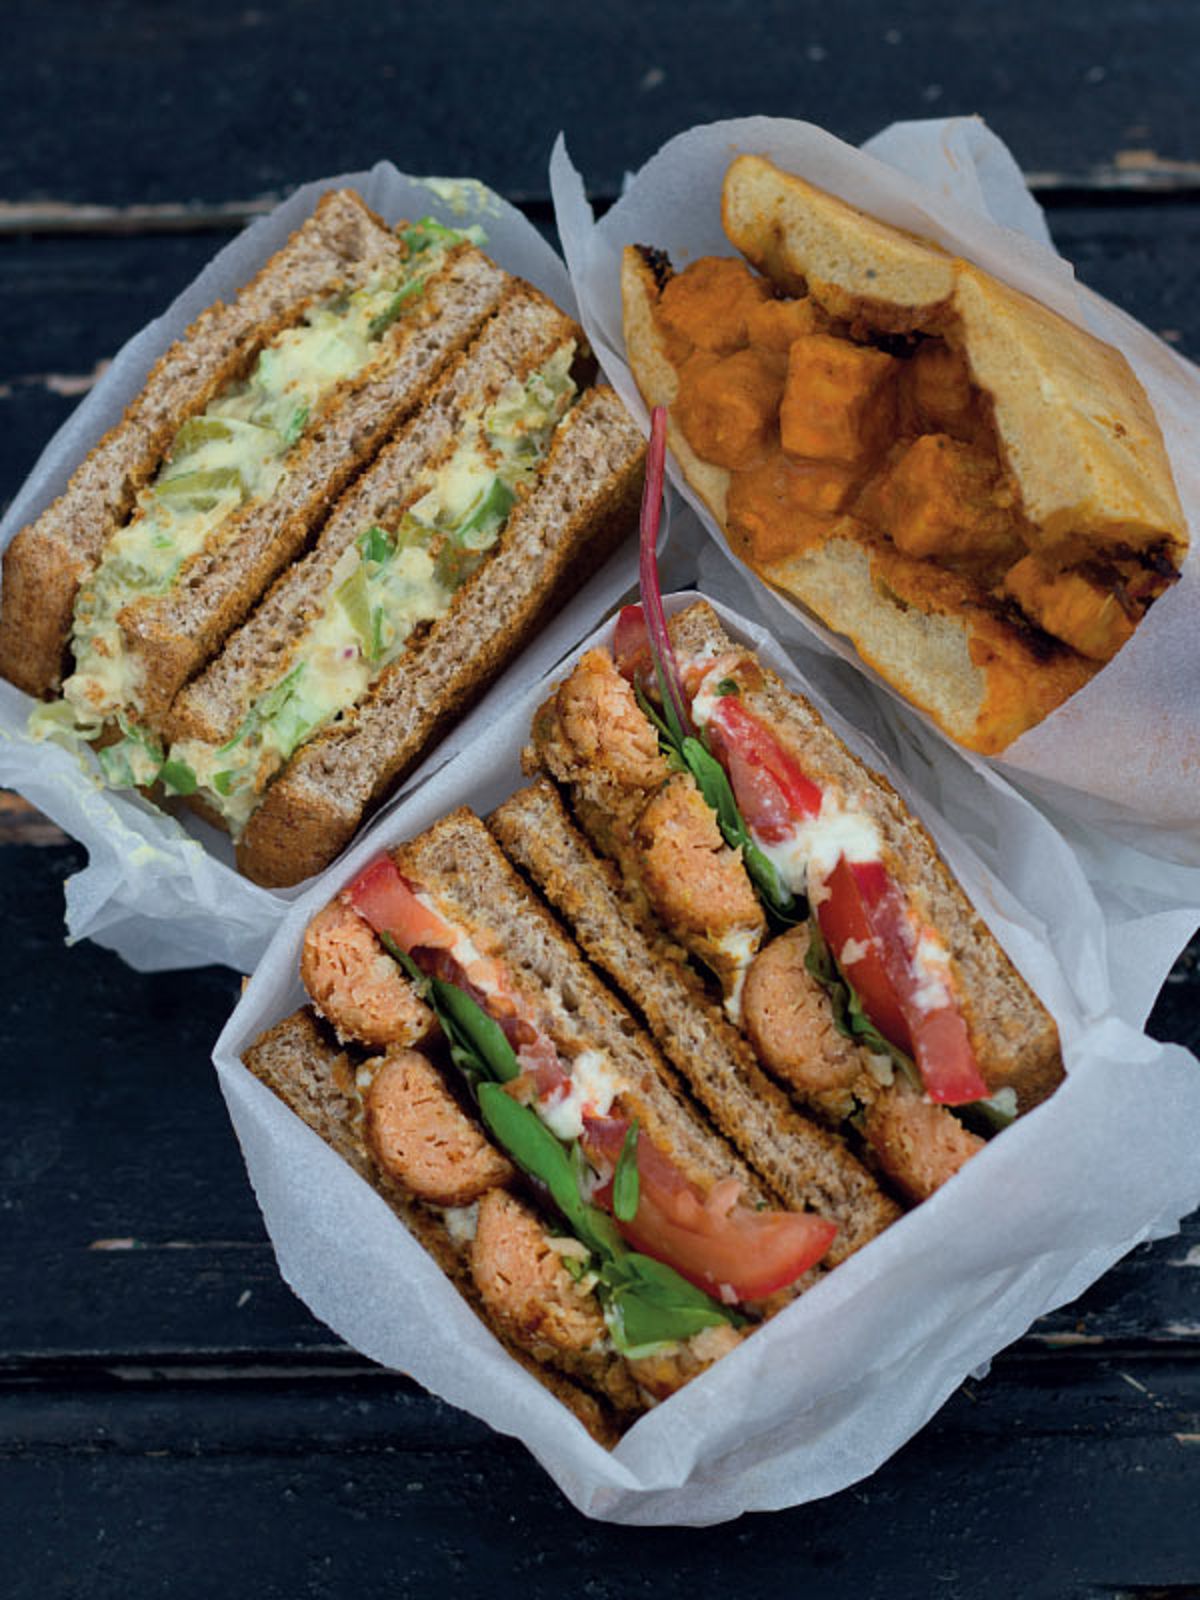 Three Plant-based Back-to-School Sandwiches